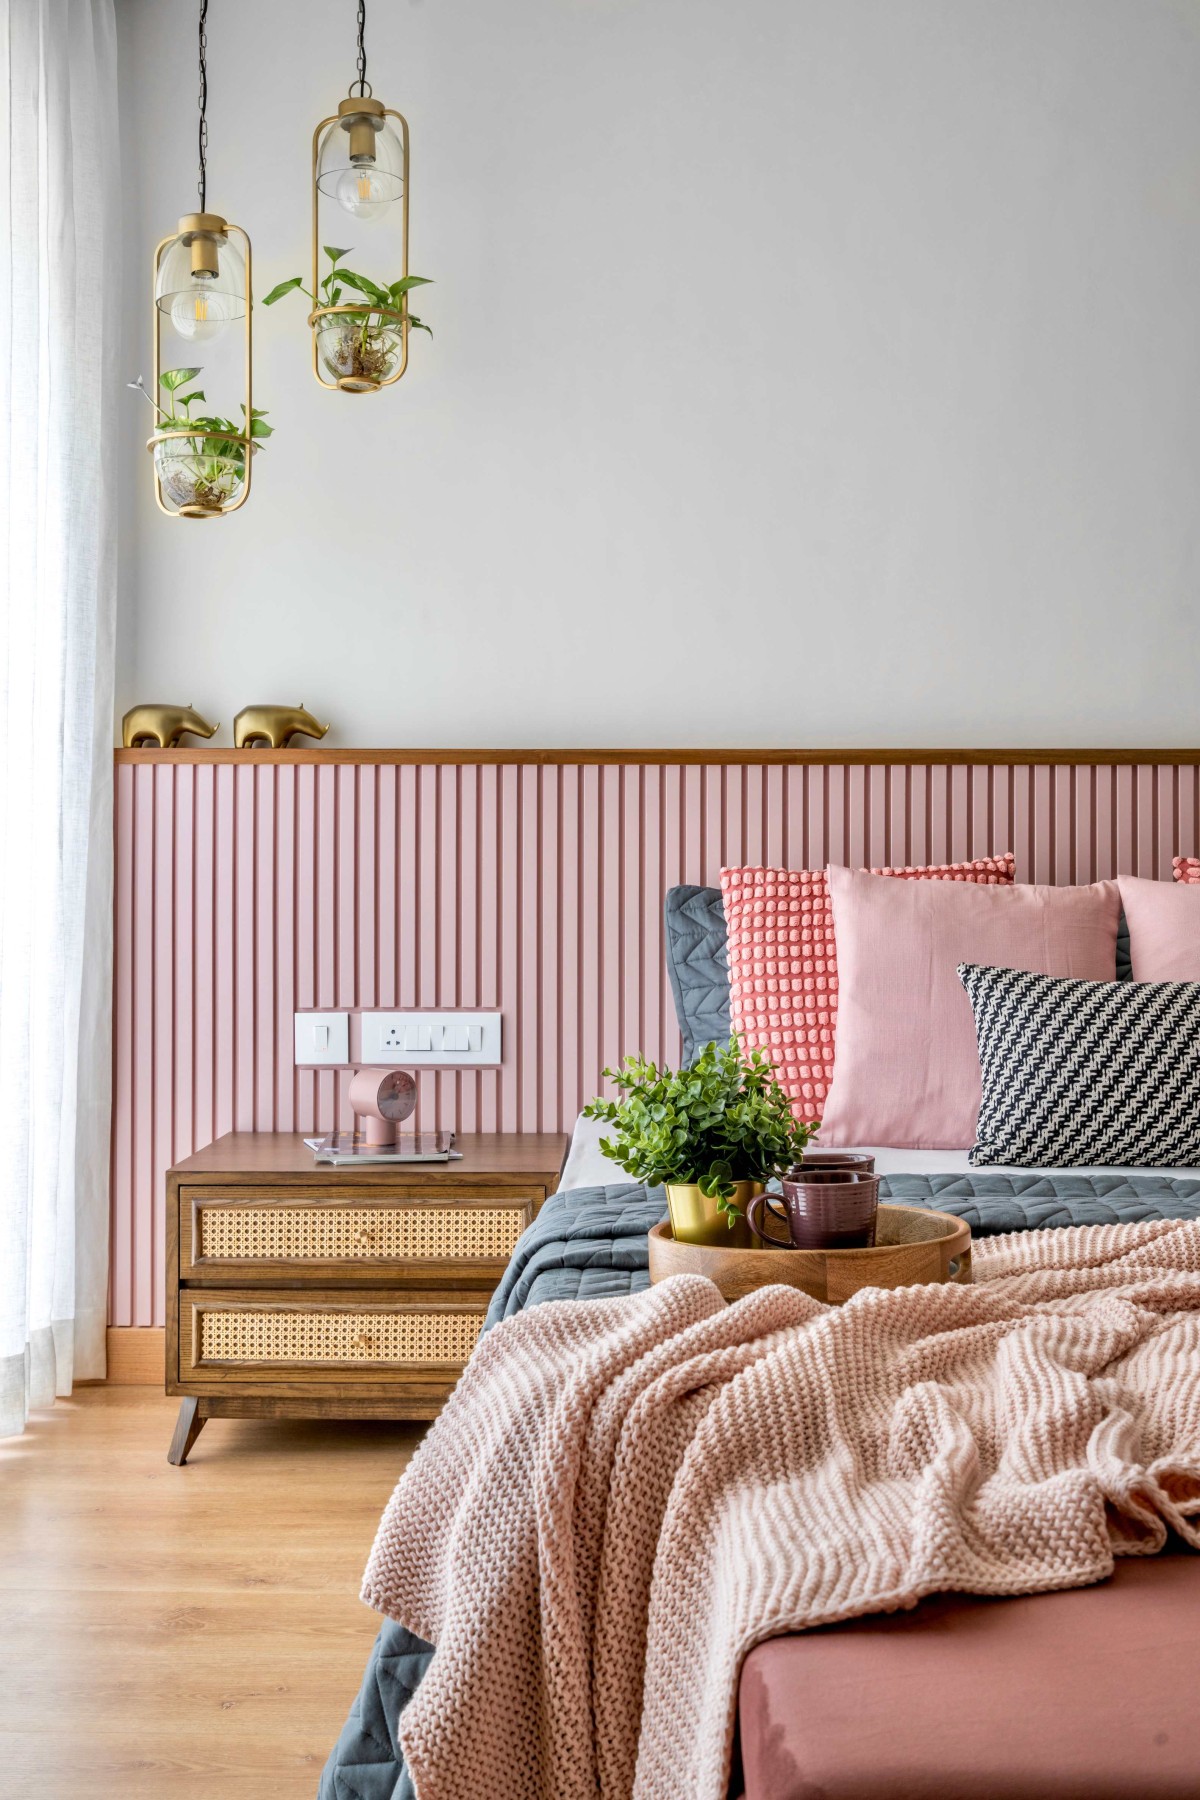 Daughters Bedroom of Abode Of Hues by DNC Studio9